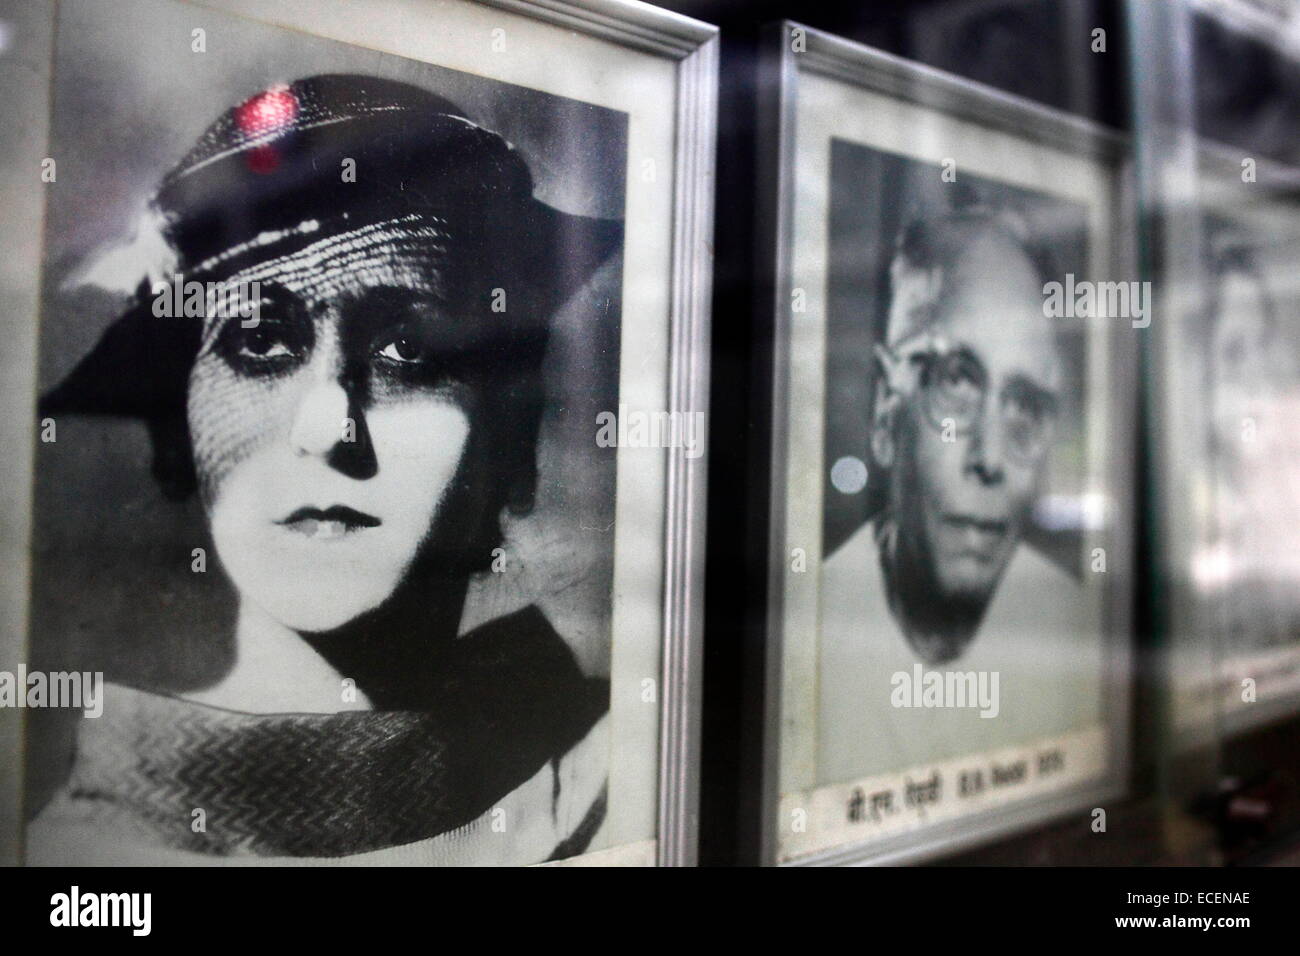 Pune, India. 25th Nov, 2014. Posters of famous Film personalities adorn the walls at the National Film Archive of India. © Subhash Sharma/ZUMA Wire/ZUMAPRESS.com/Alamy Live News Stock Photo